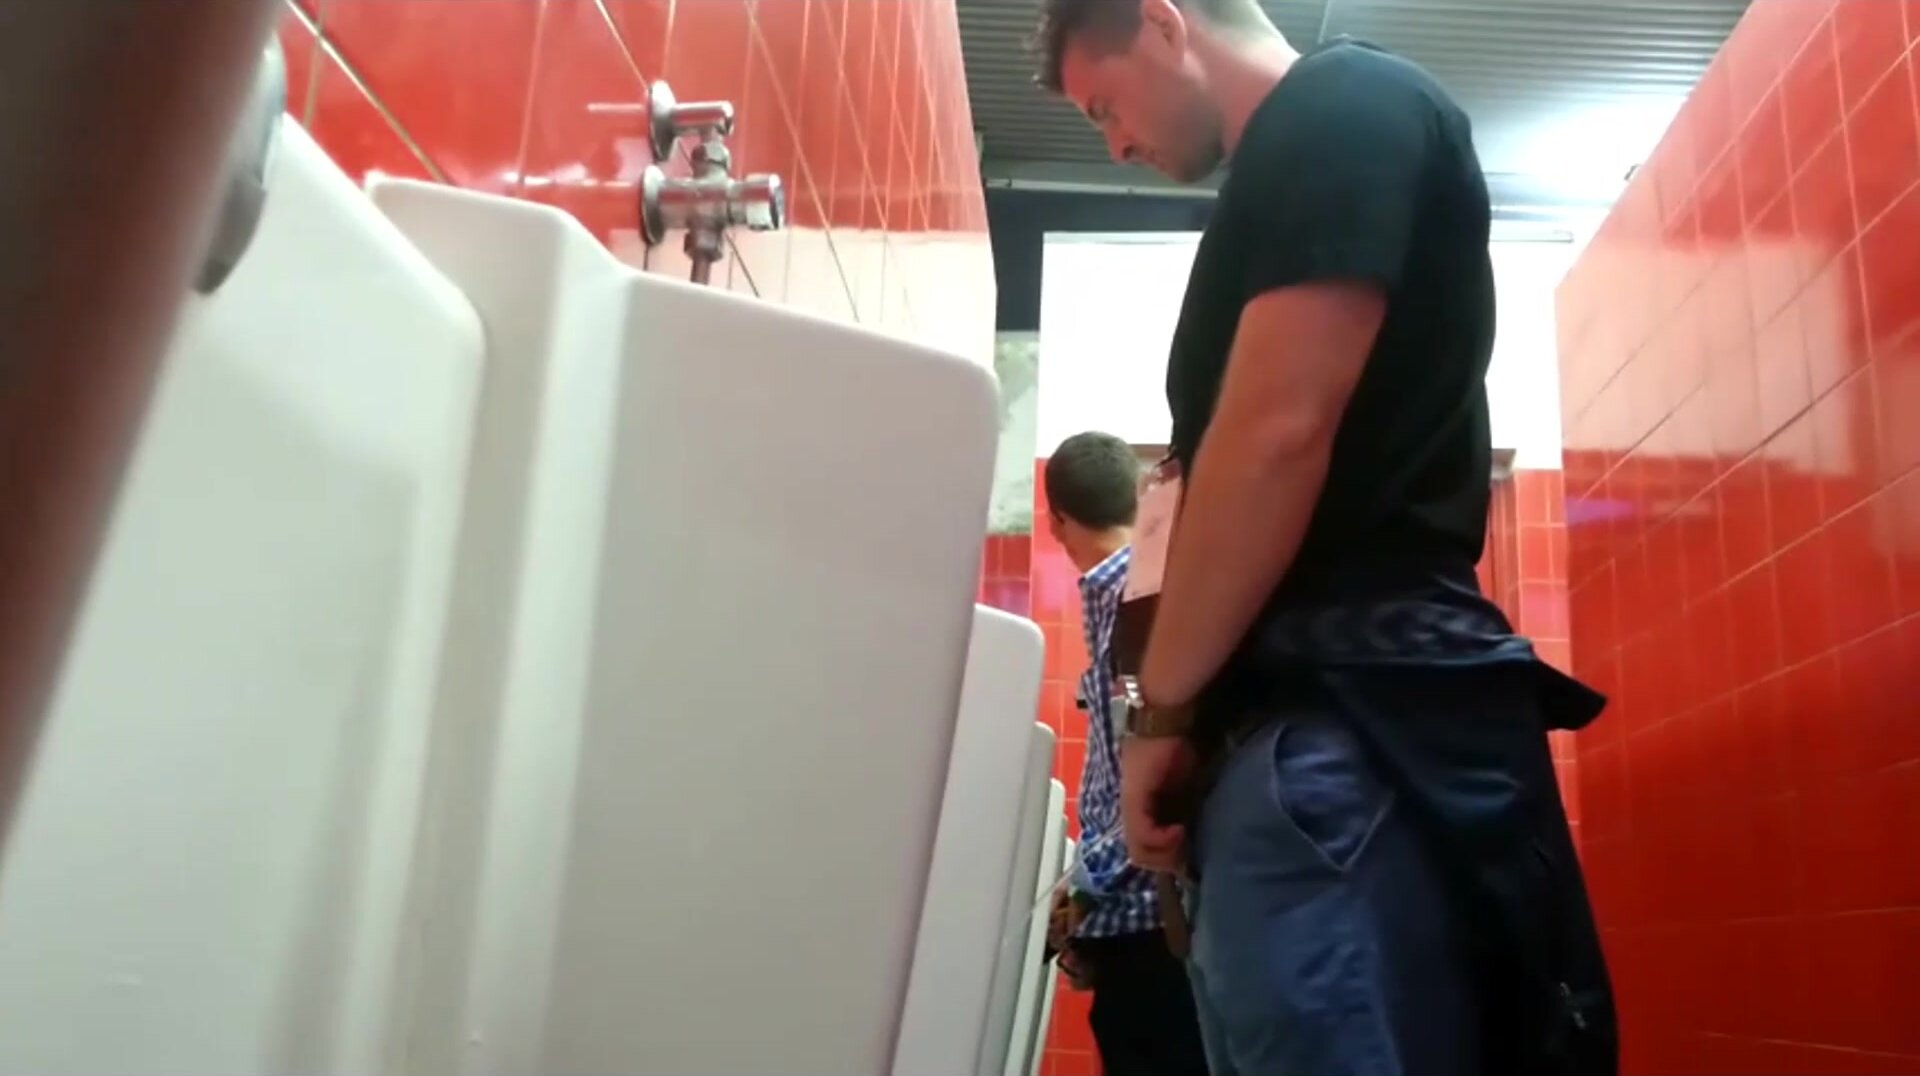 small dicked guy taking a peek a bigger dick at urinal